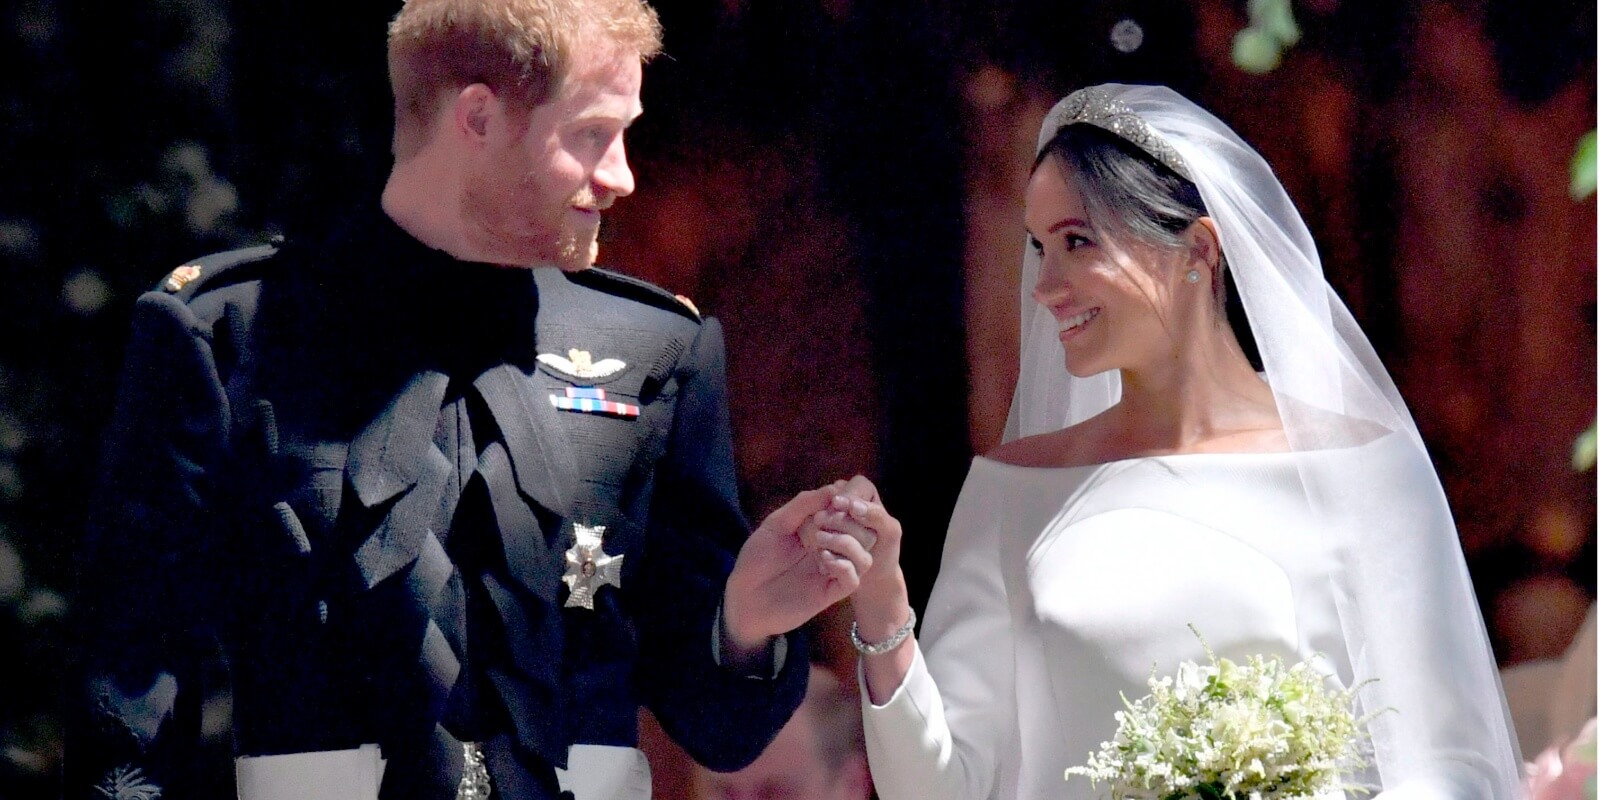 Prince Harry and Meghan Markle on their wedding day, May 19, 2018.